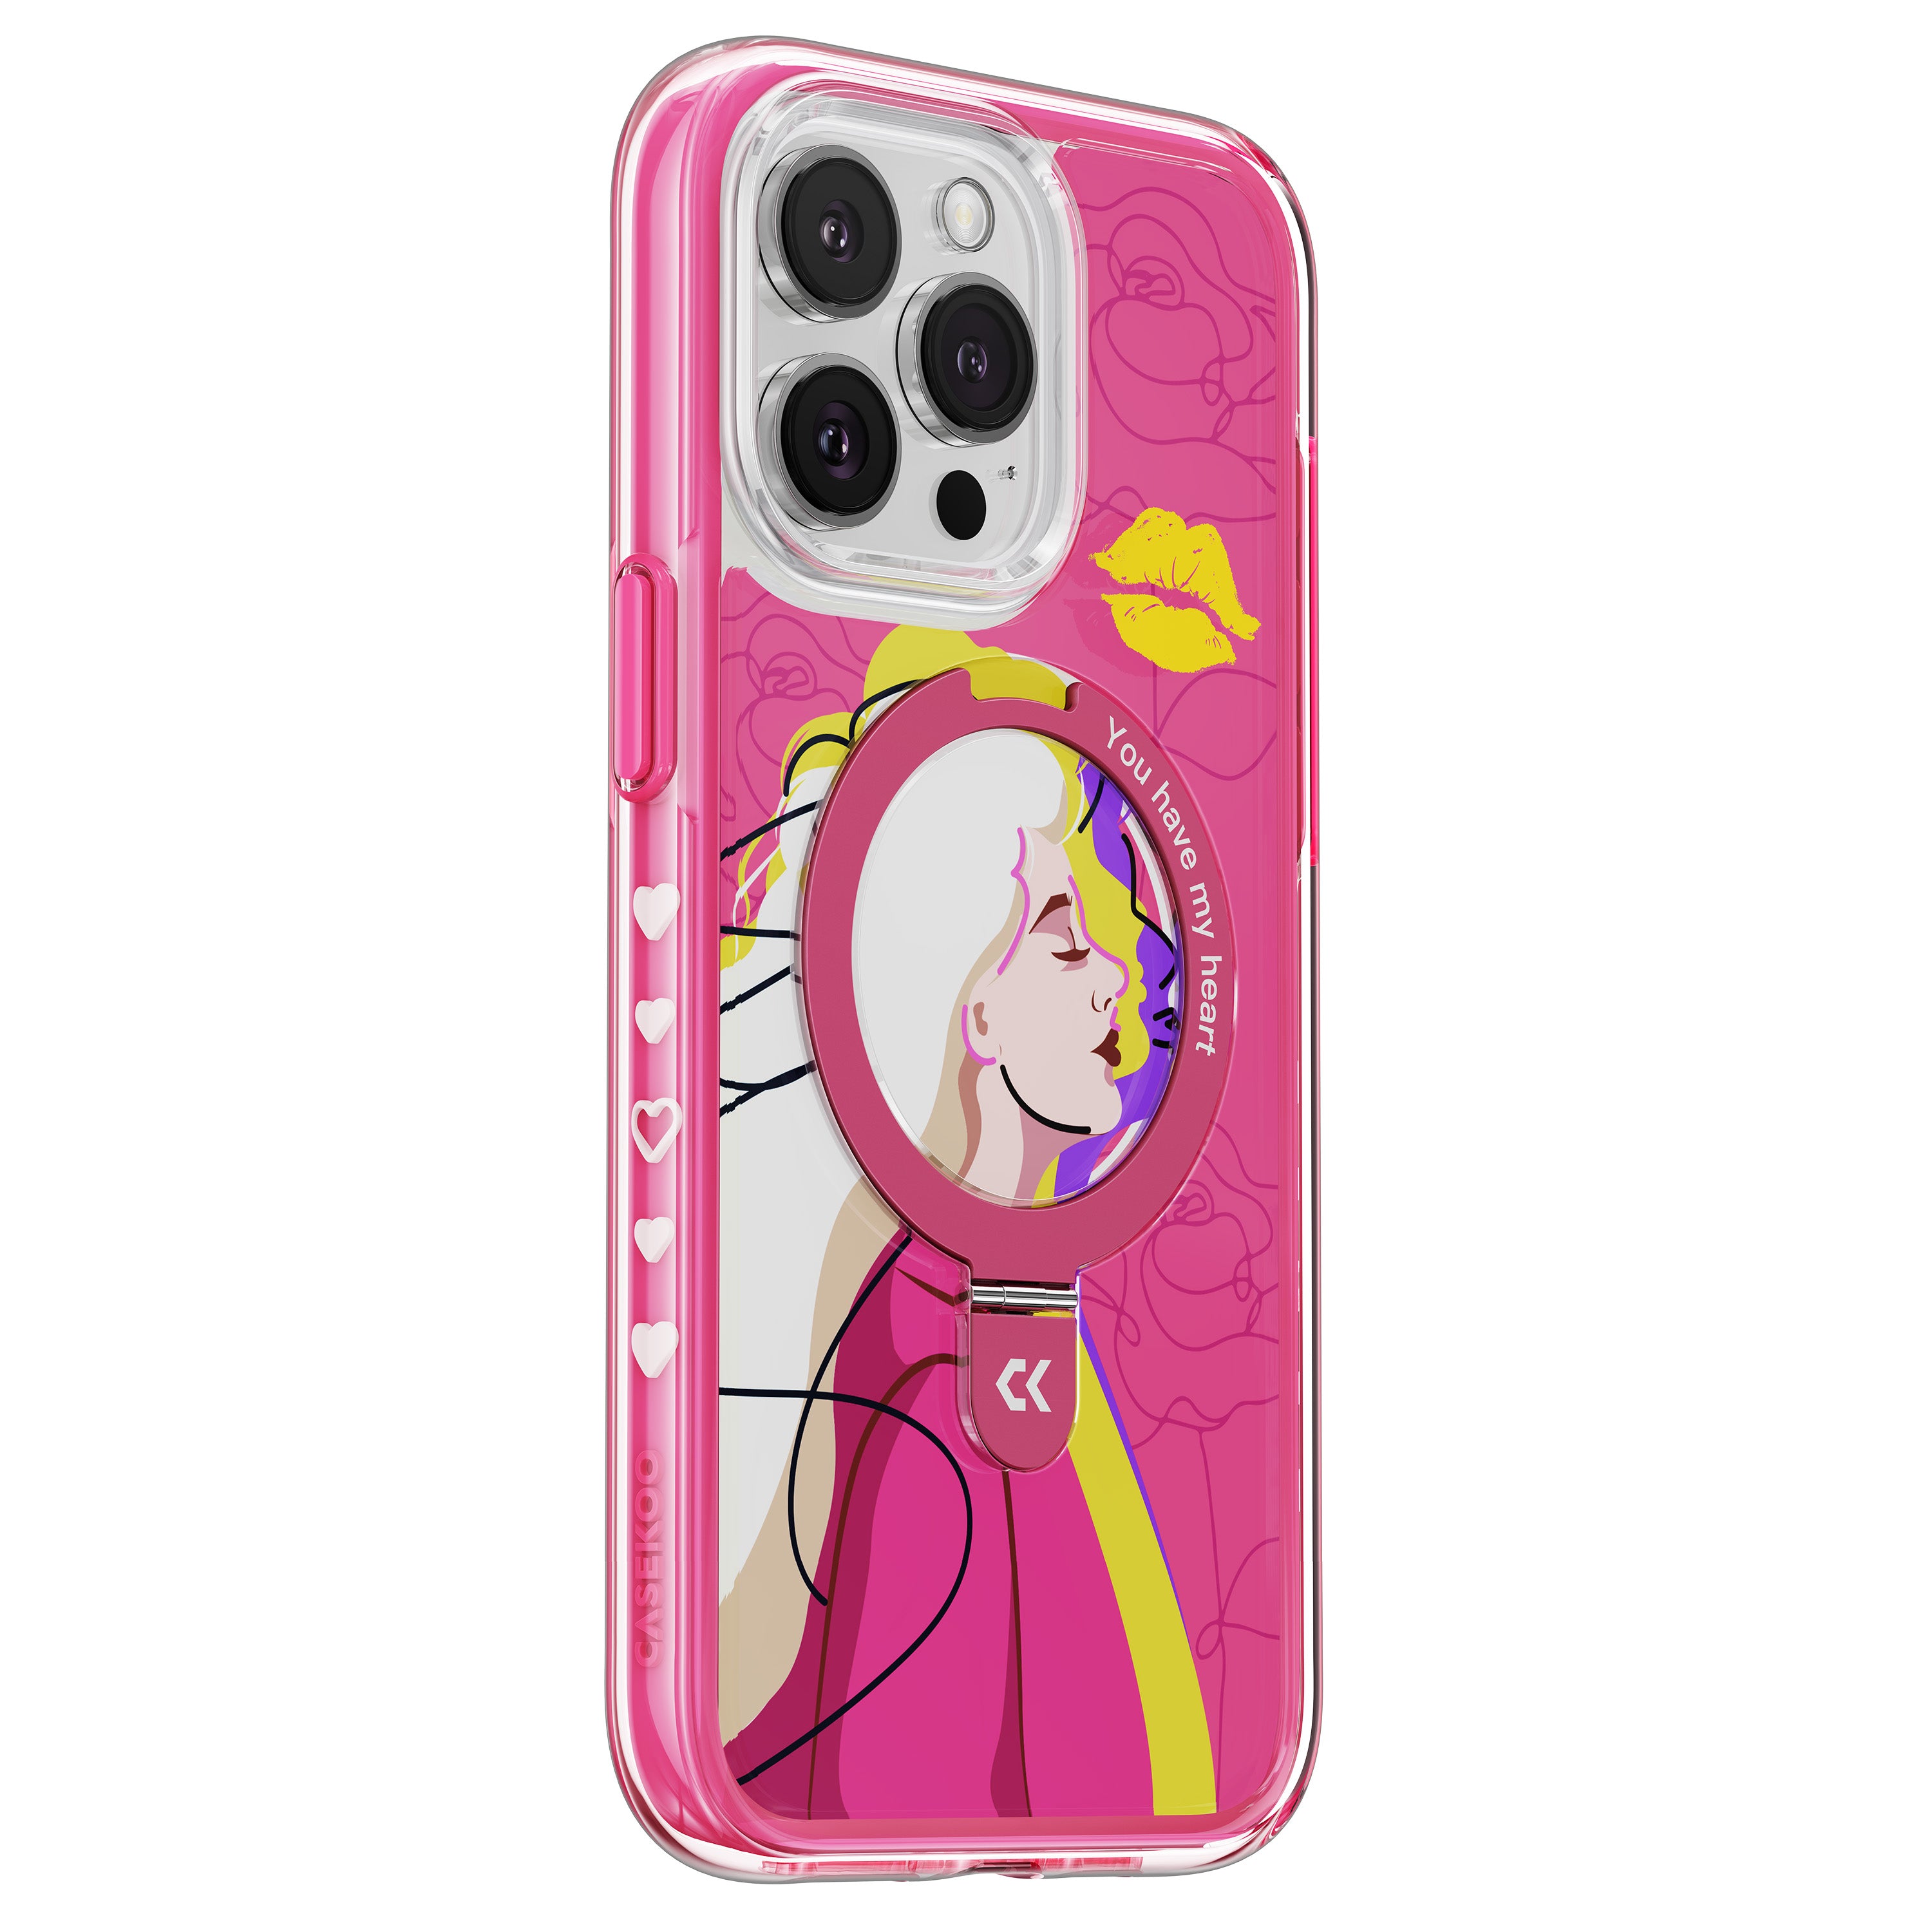 CASEKOO Valentine's Day Limited Gift iPhone Case Air Bumper